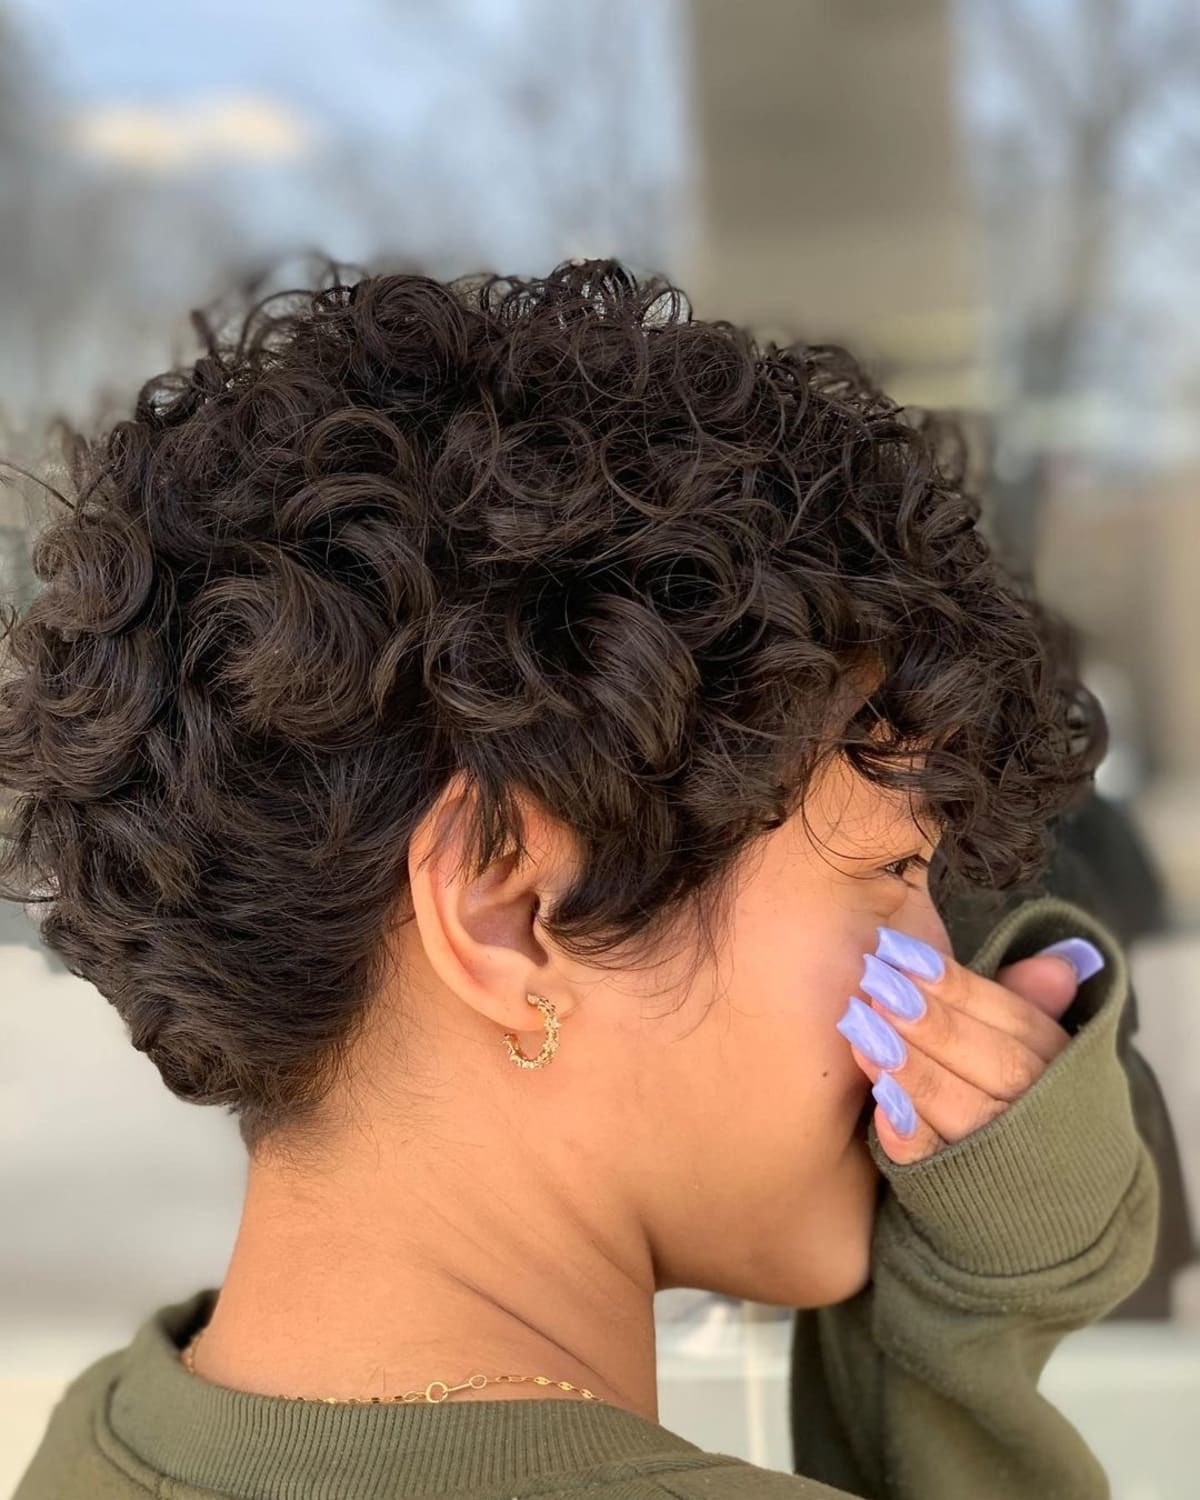 Spiral perm on a layered pixie